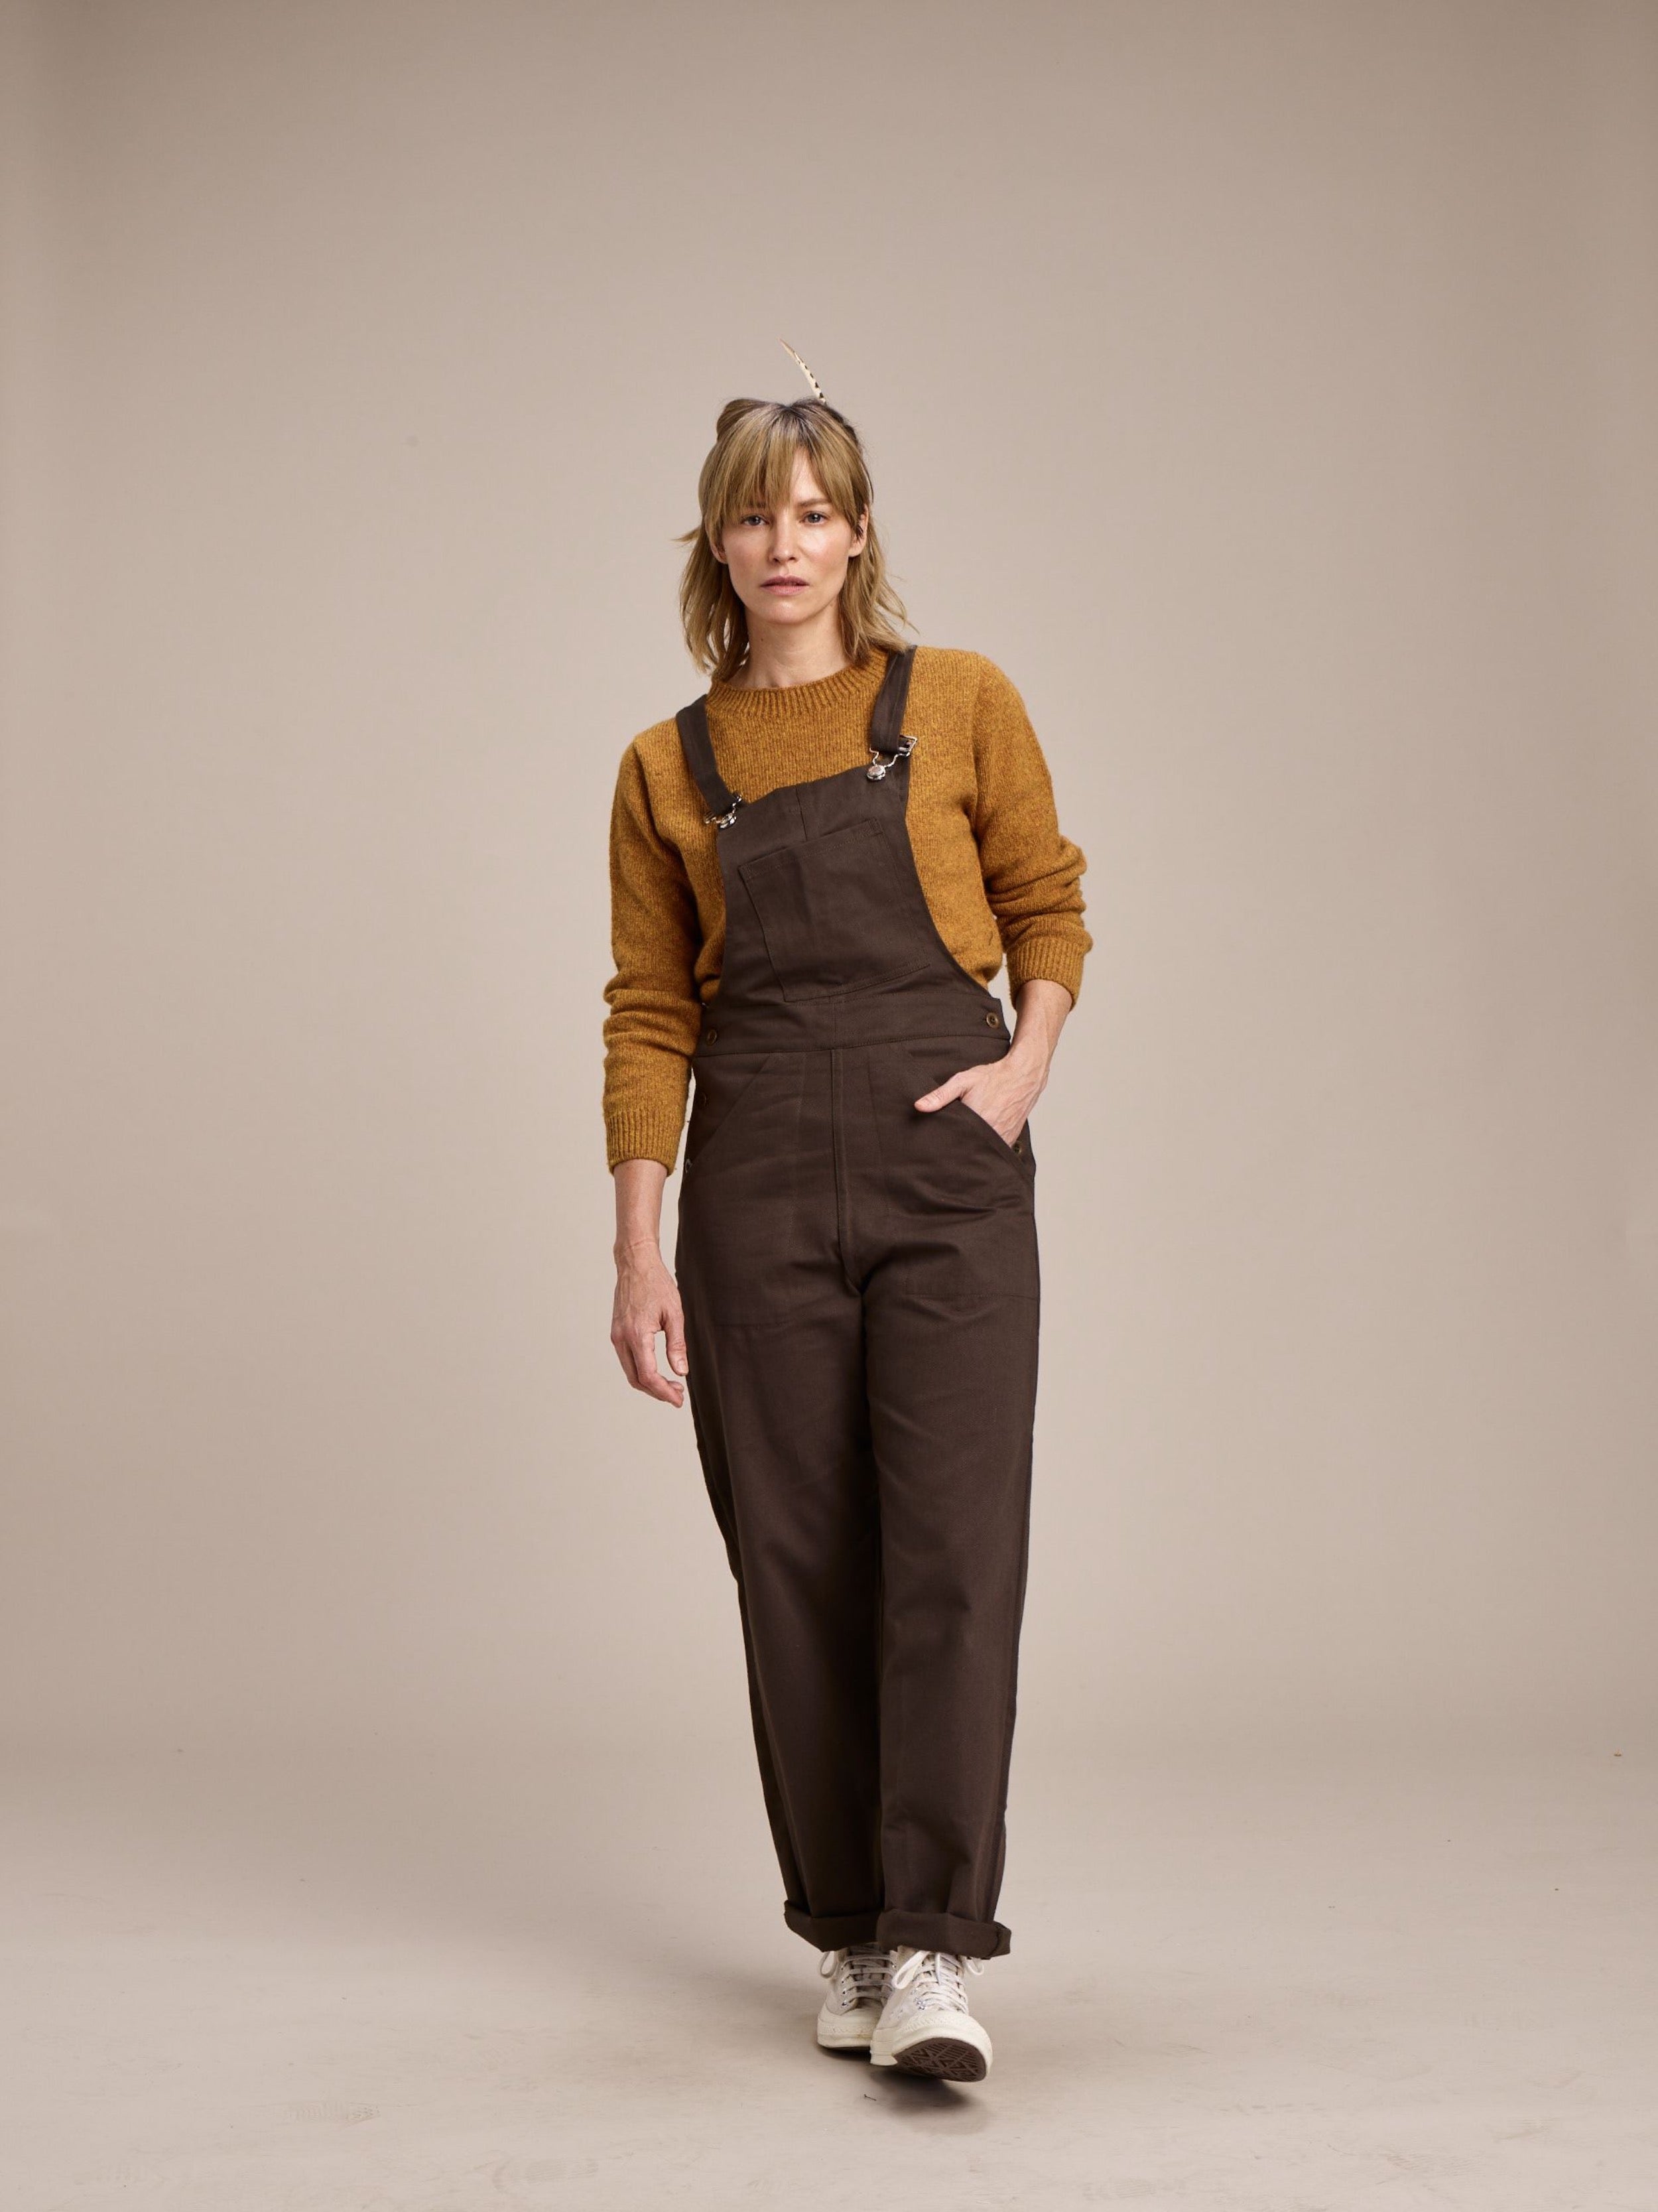 Sienna is 5'6", a 10-12 dress size and is wearing Small dungarees.